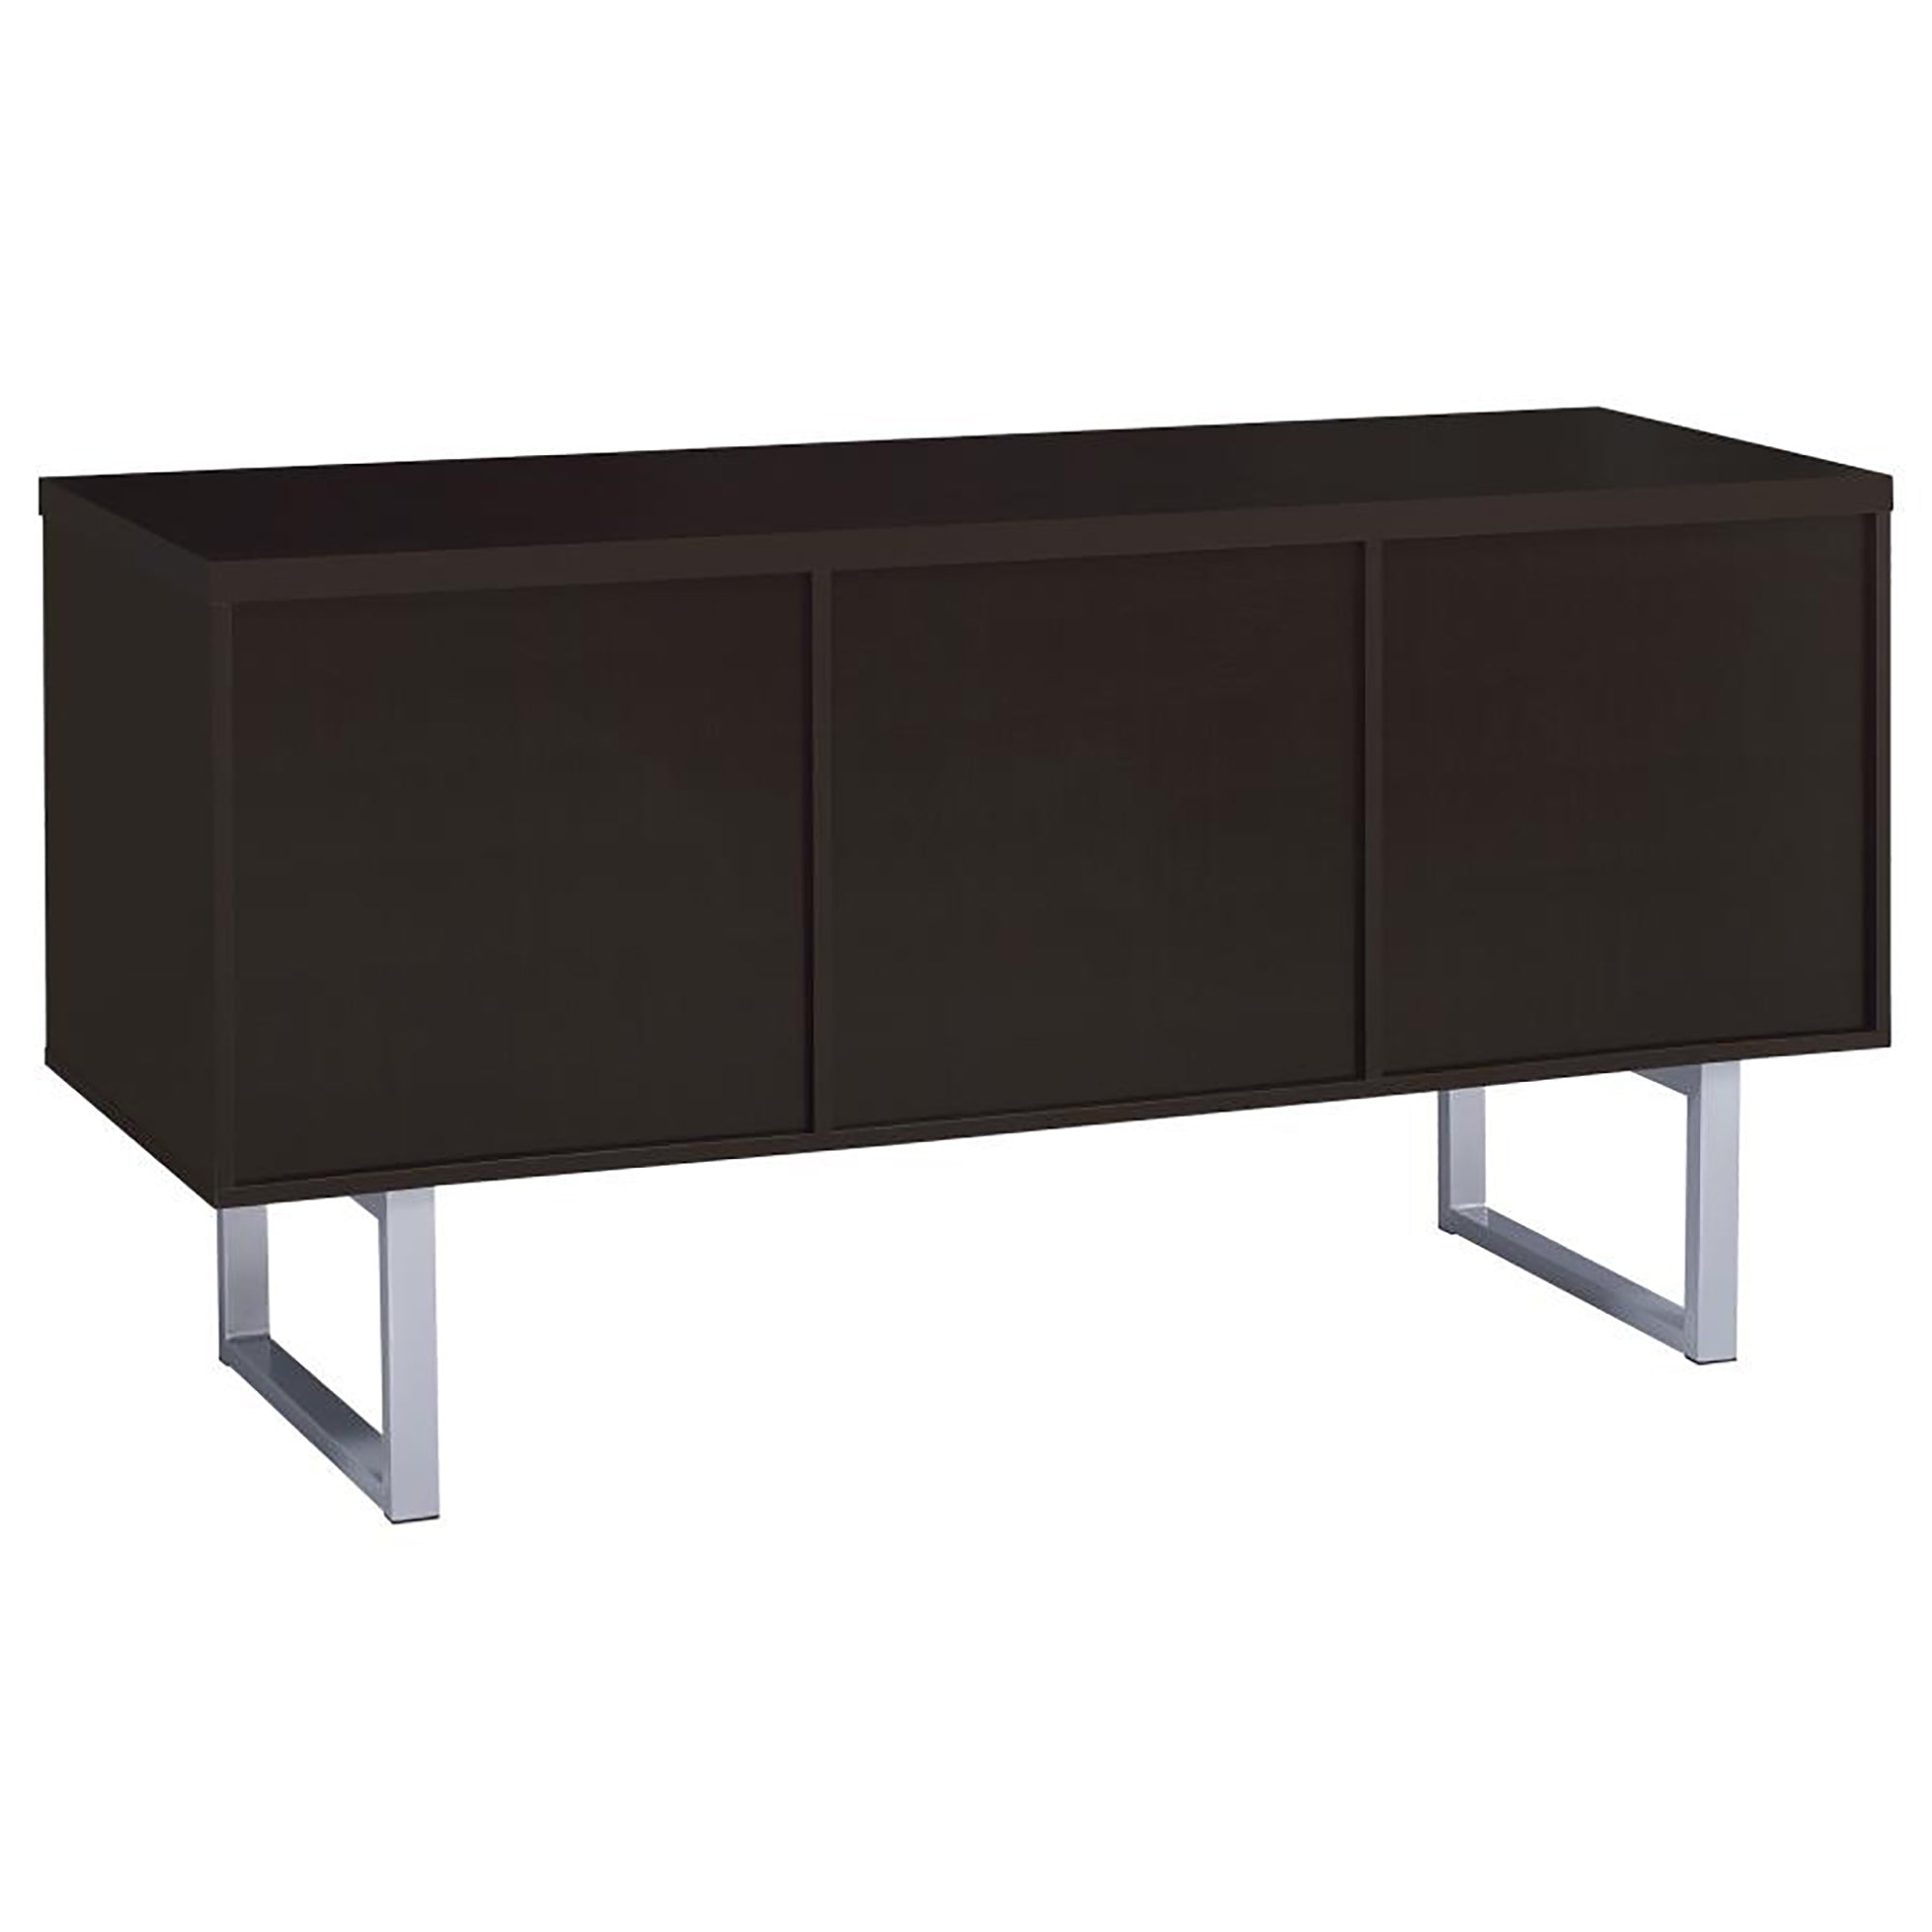 Cappuccino 5 drawer Credenza with Open Shelving